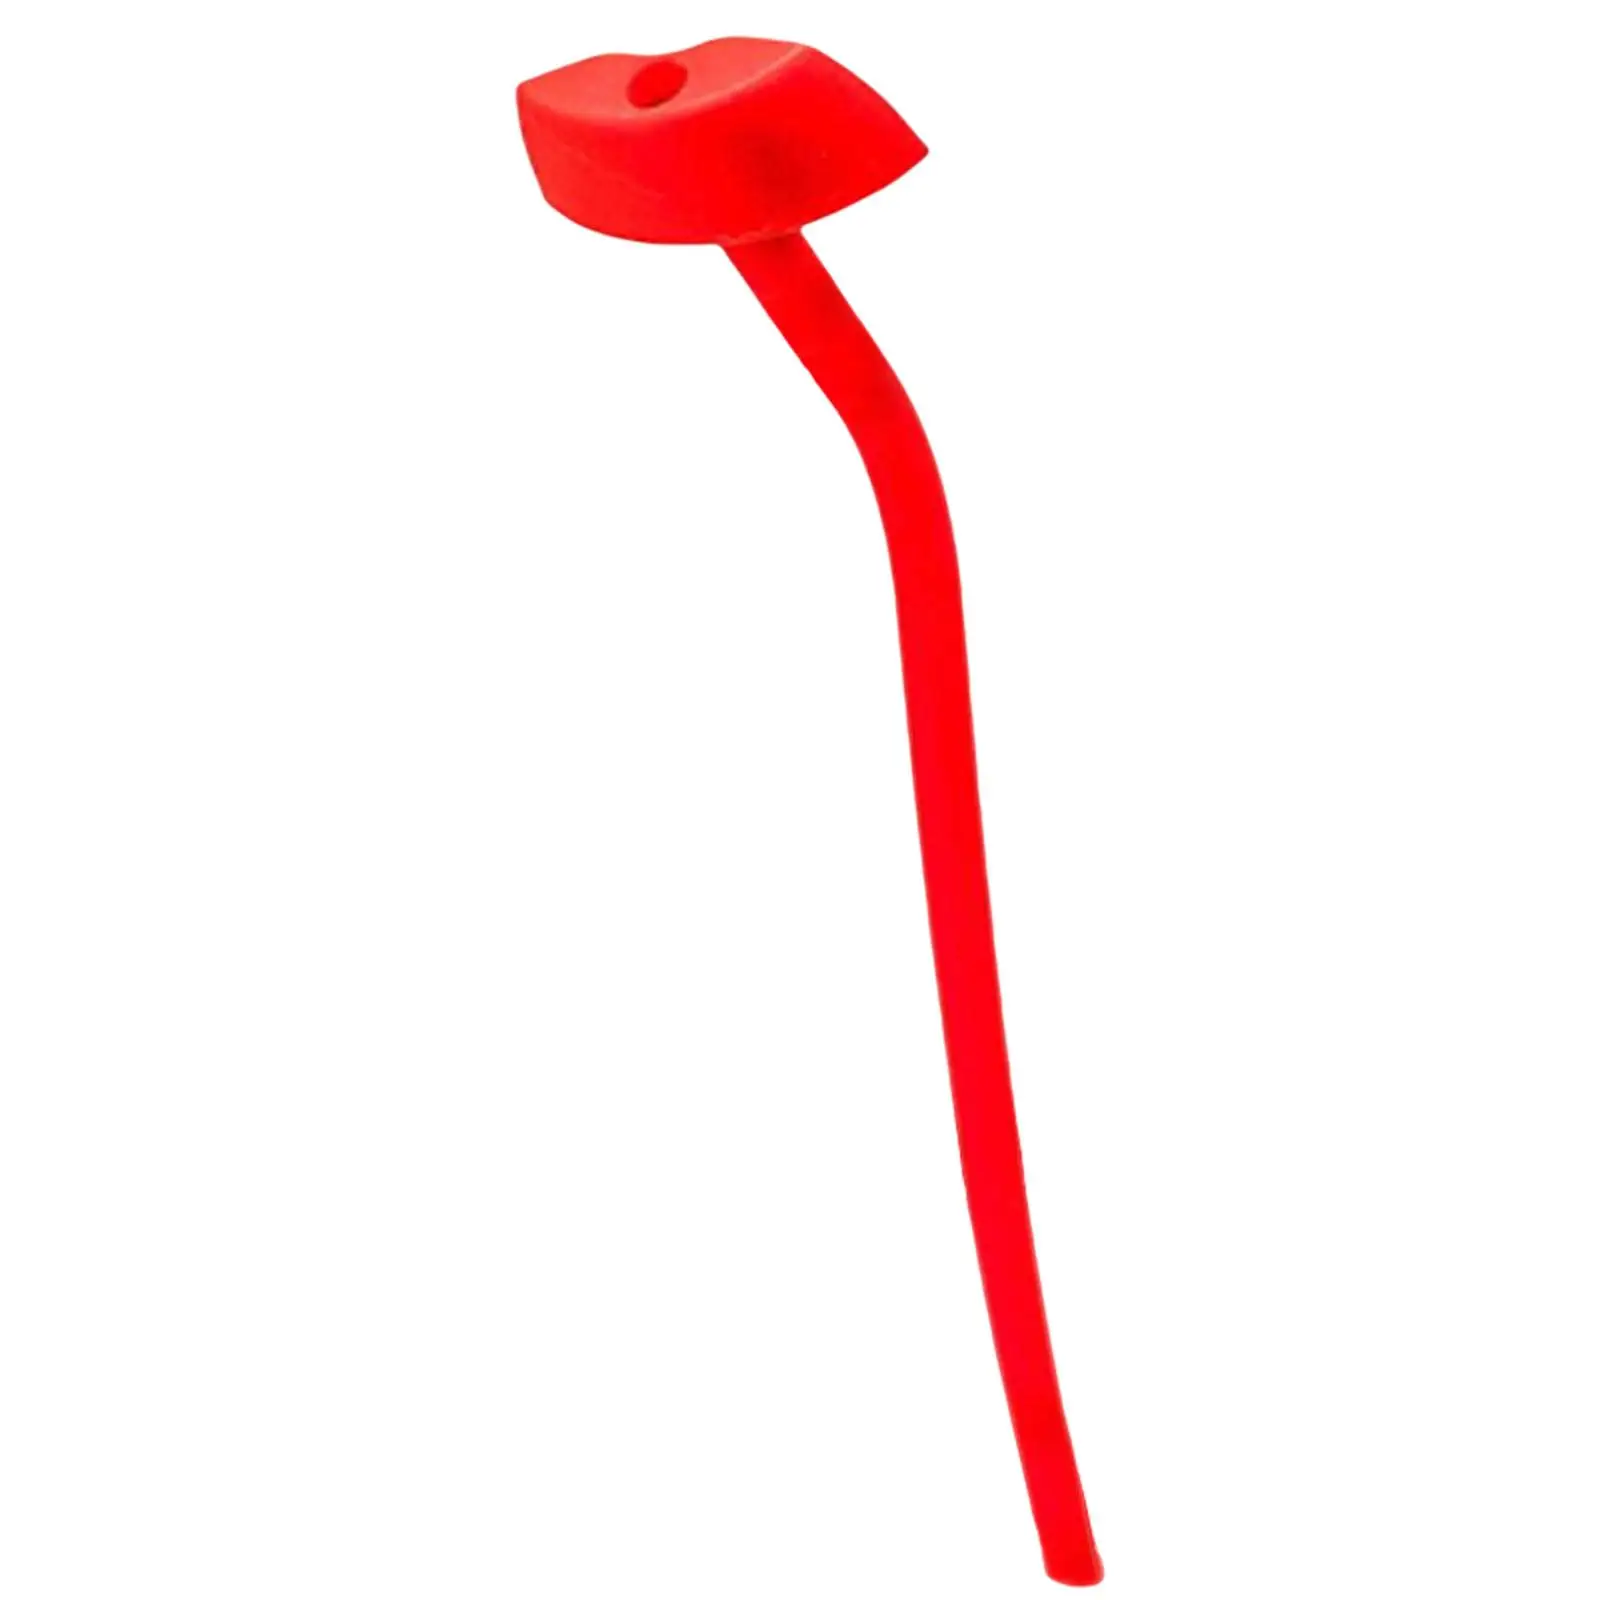 Flute Straw Soft Flexible Drinking Straw for Tea Hot Cold Beverages Juice